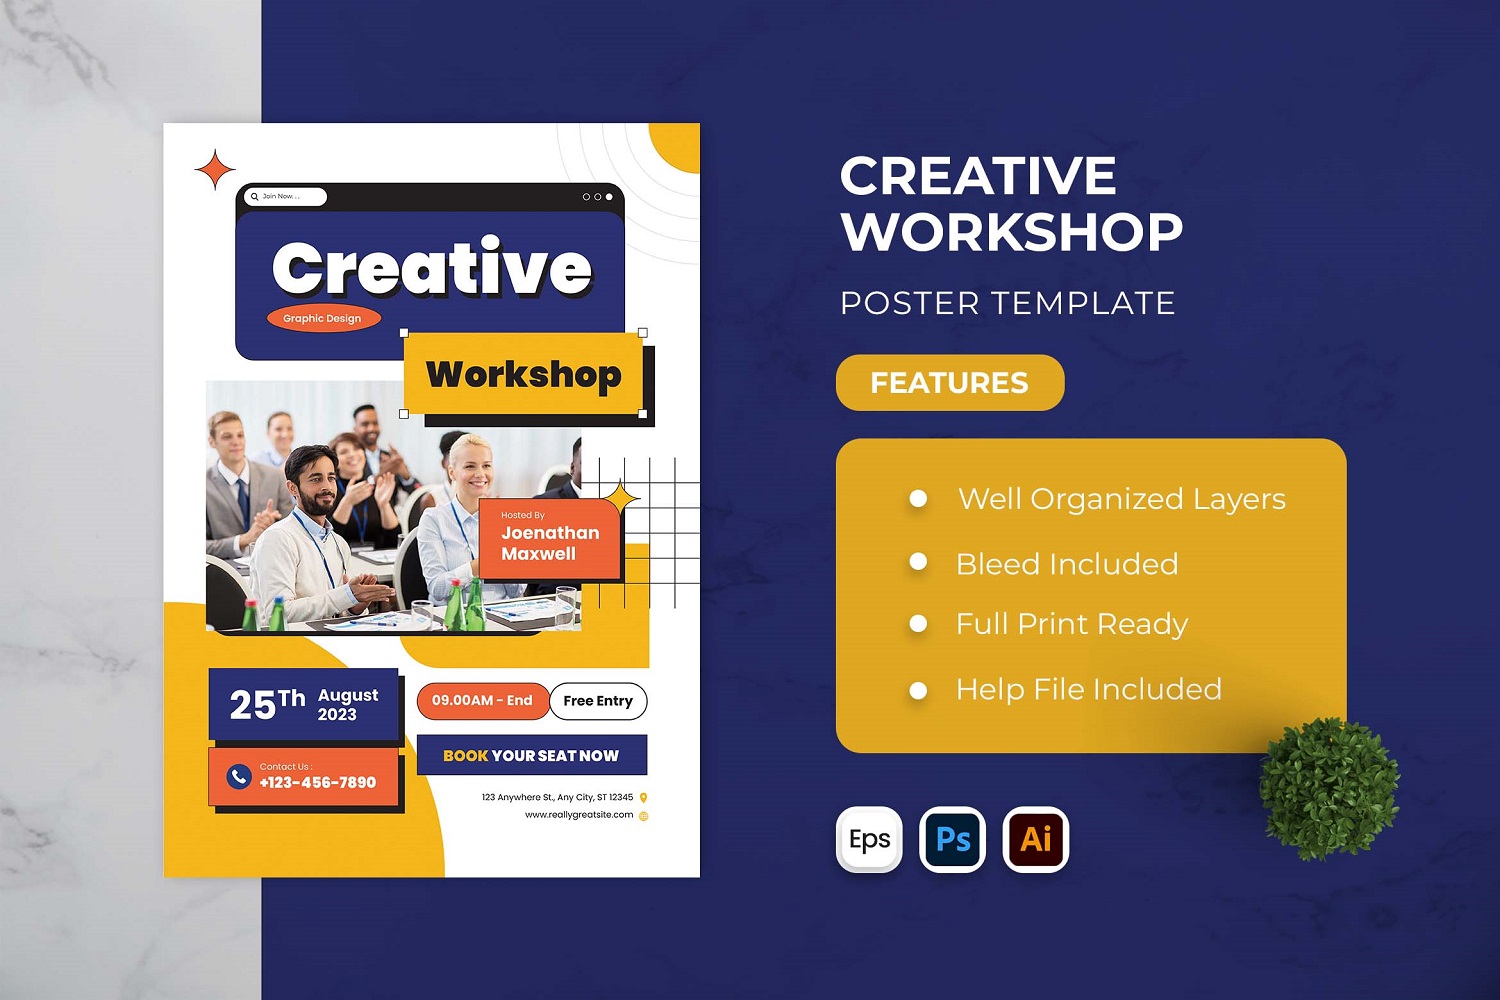 Creative Workshop Poster Template